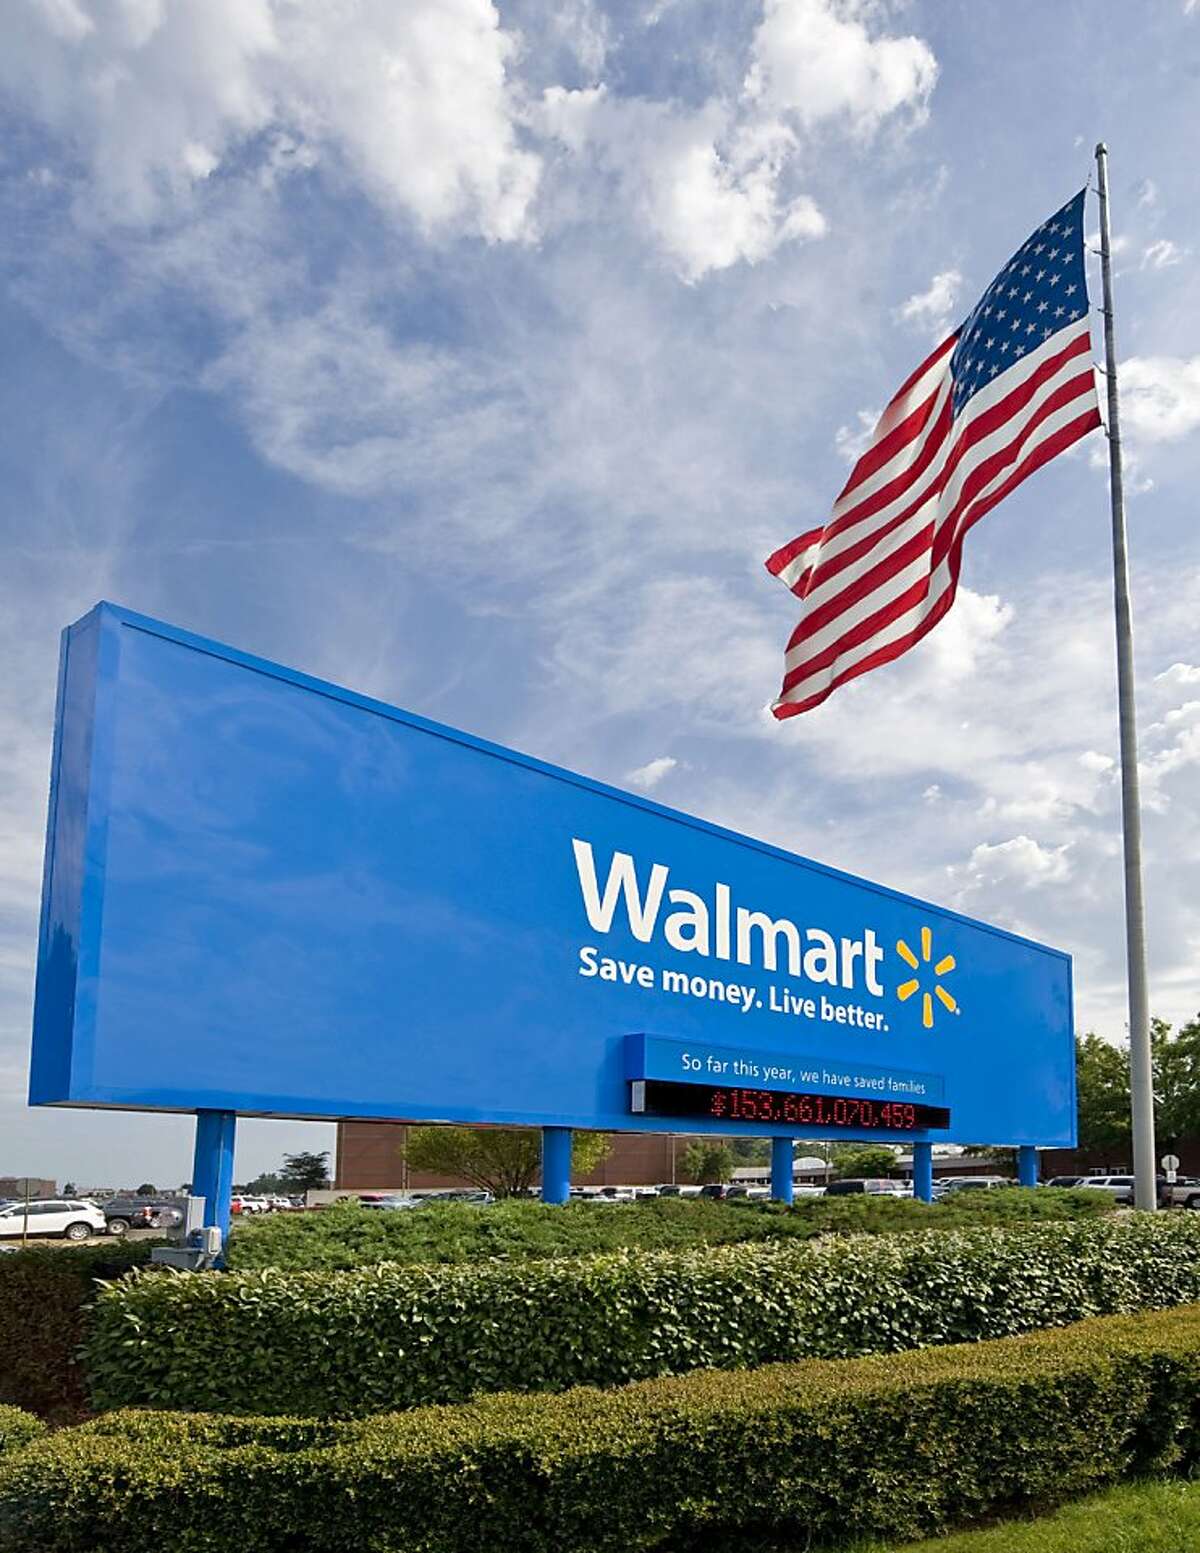 This undated file photo provided by Wal-Mart Stores Inc., shows the company's sign in front of their Bentonville, Ark., headquarters. Wal-Mart Stores Inc. announced a program Thursday, June 3, 2010, in which its workers can receive college credit from the online American Public University and receive a tuition discount from the school.